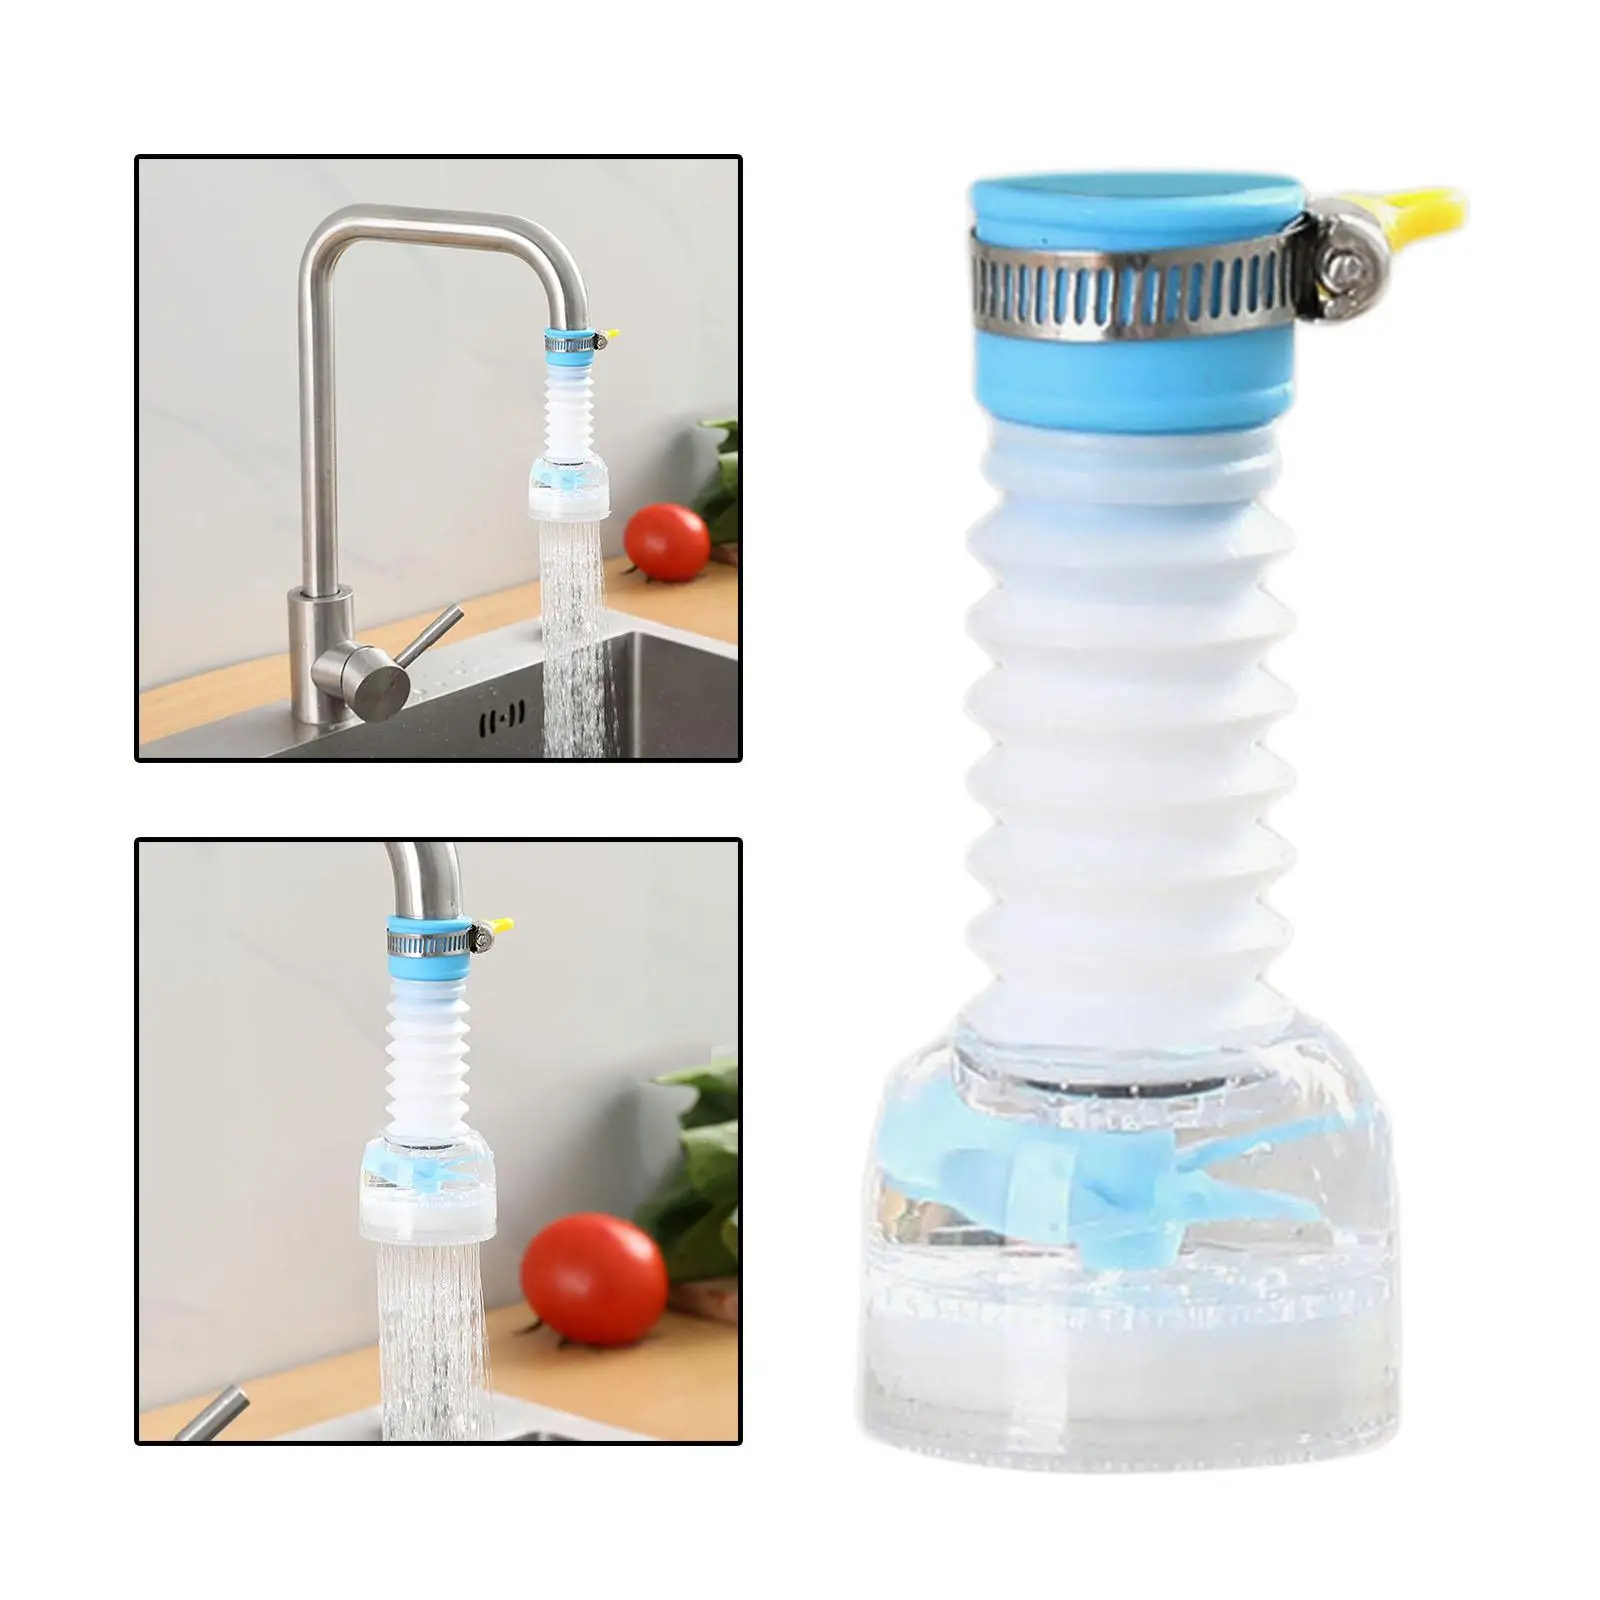 Faucet Splash Filter Sprayer Tap Attachment 360 Rotating Easy Install Water Saver Universal Faucet Booster Nozzle for Kitchen